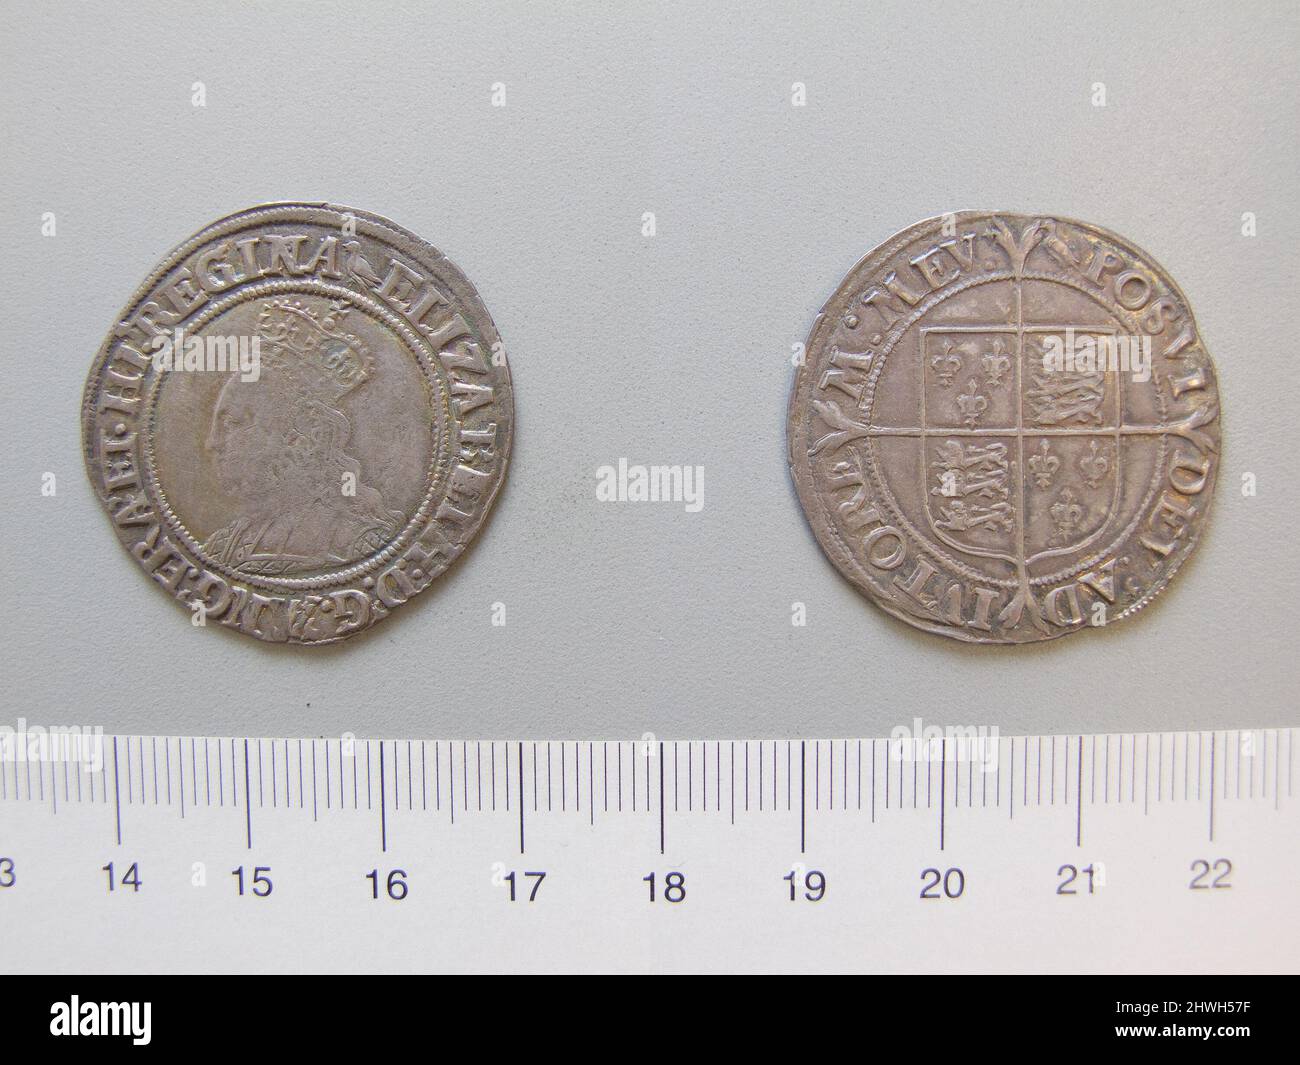 1 Shilling of Elizabeth I, Queen of England from London. Ruler: Elizabeth I, Queen of England, British, 1533–1603, ruled 1558–1603 Mint: London Artist: Unknown Stock Photo